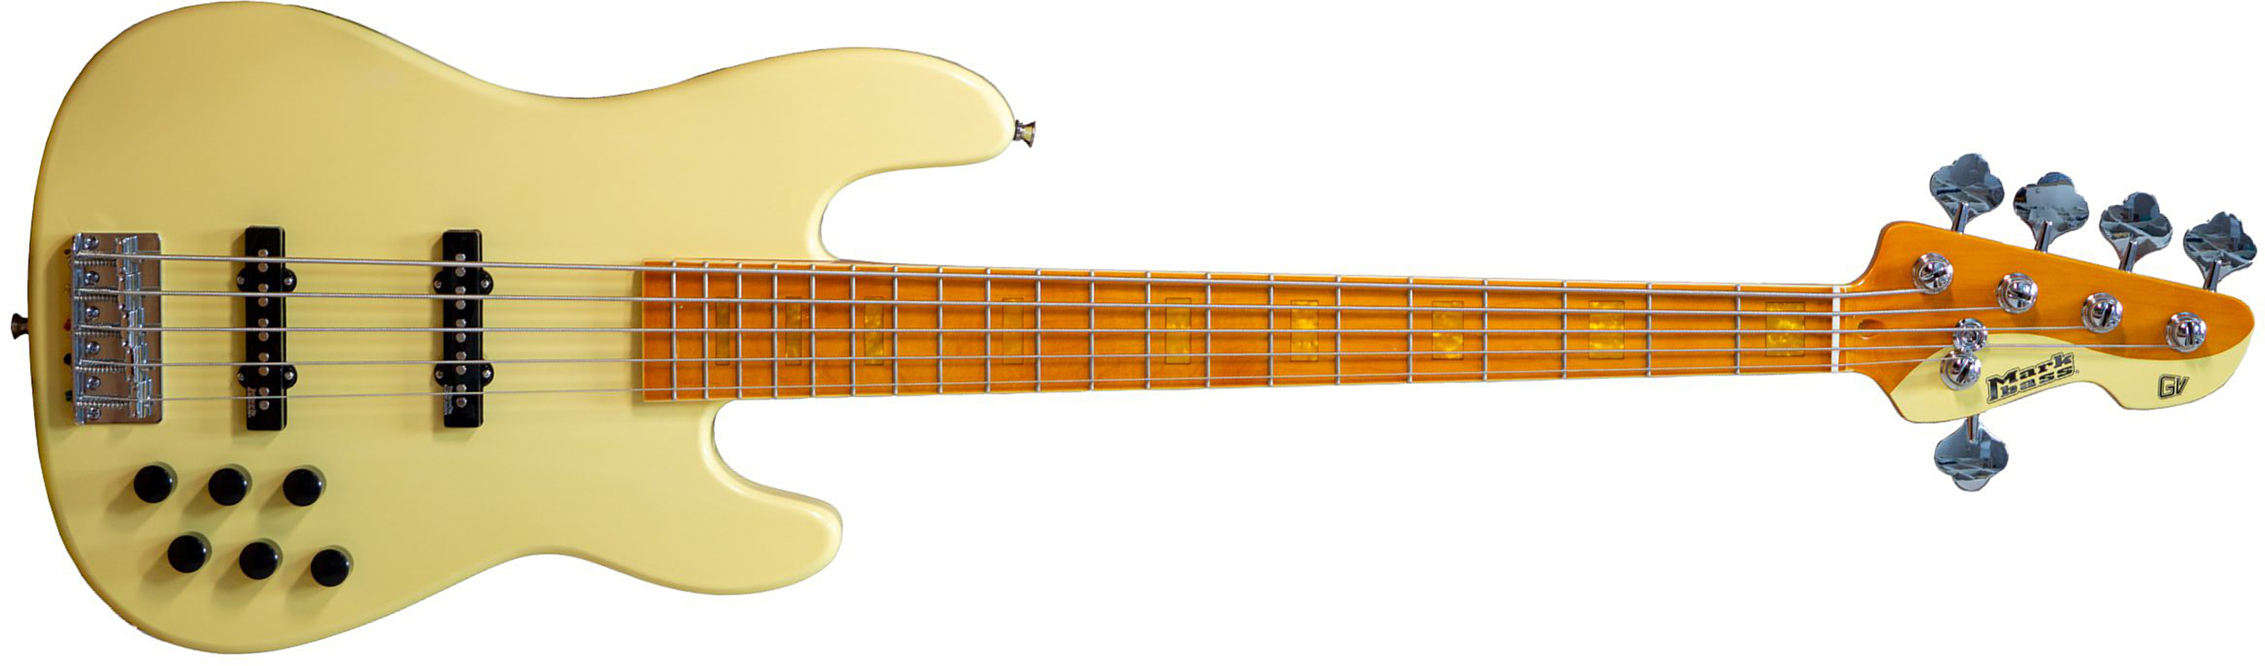 Markbass Mb Gv 5 Gloxy Val Cr Mp 5c Active Mn - Cream - Solid body electric bass - Main picture